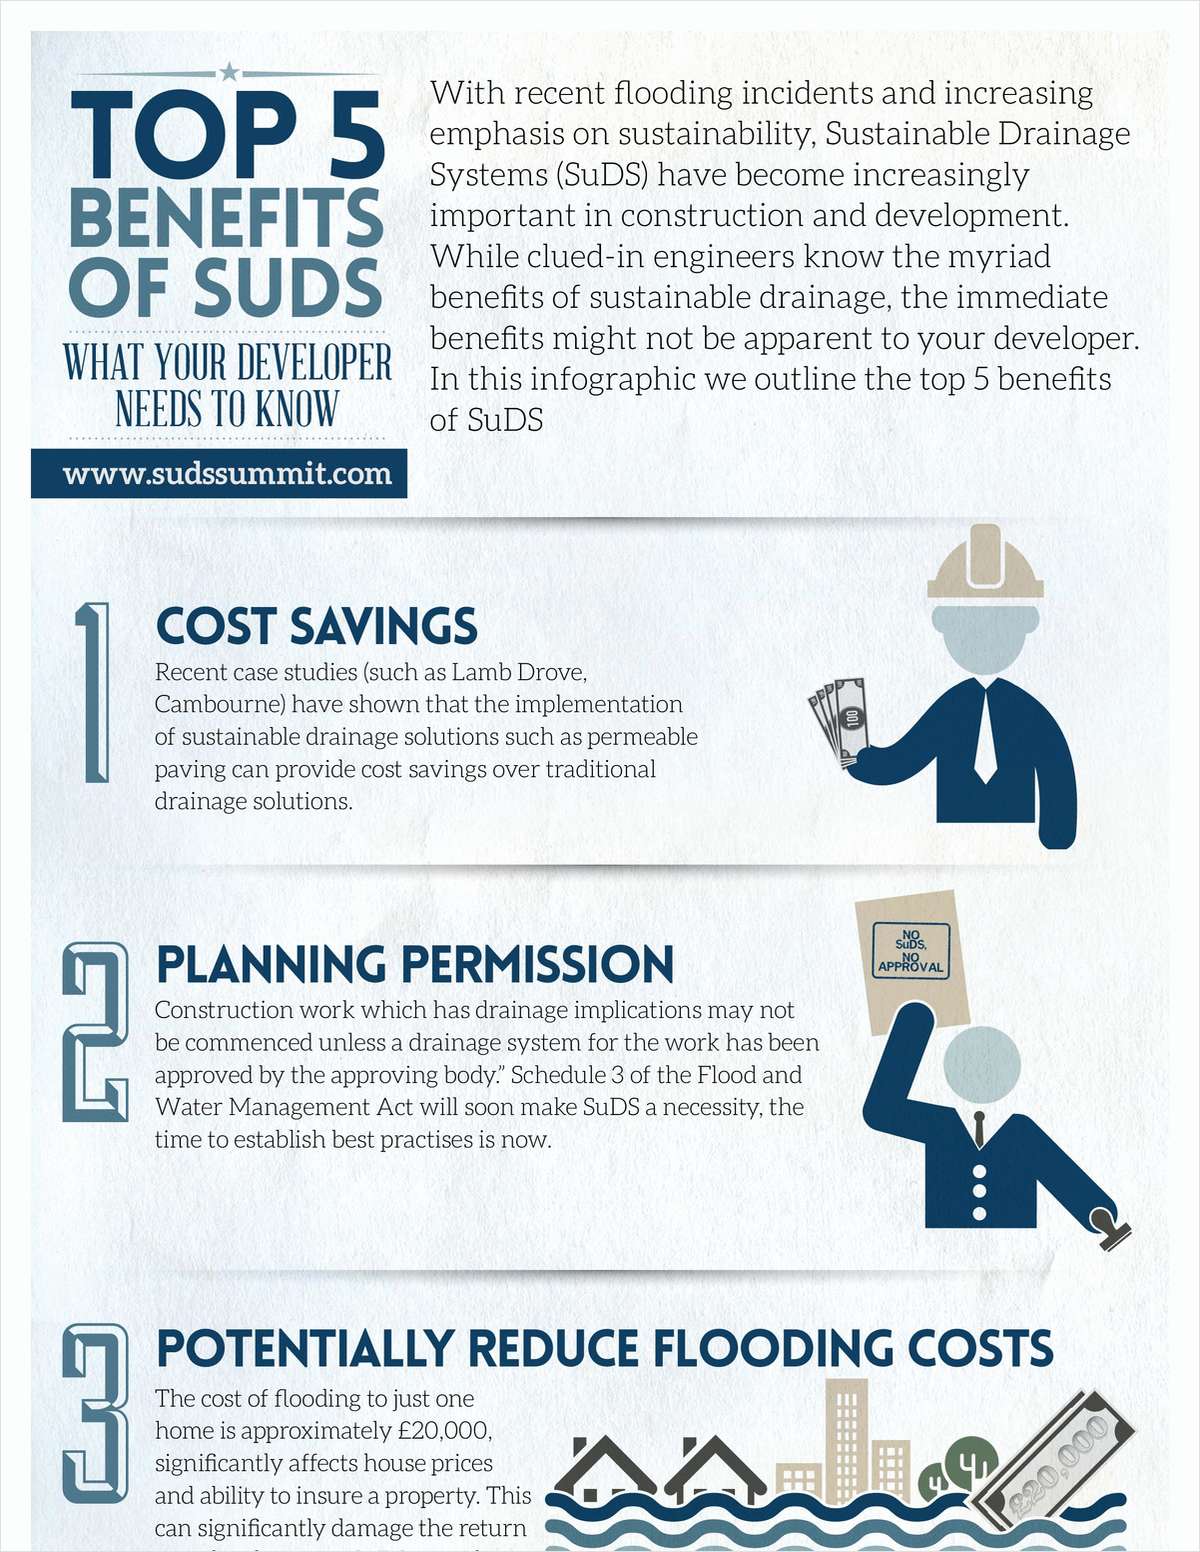 Top 5 Benefits of SuDS - What Your Developer Needs to Know